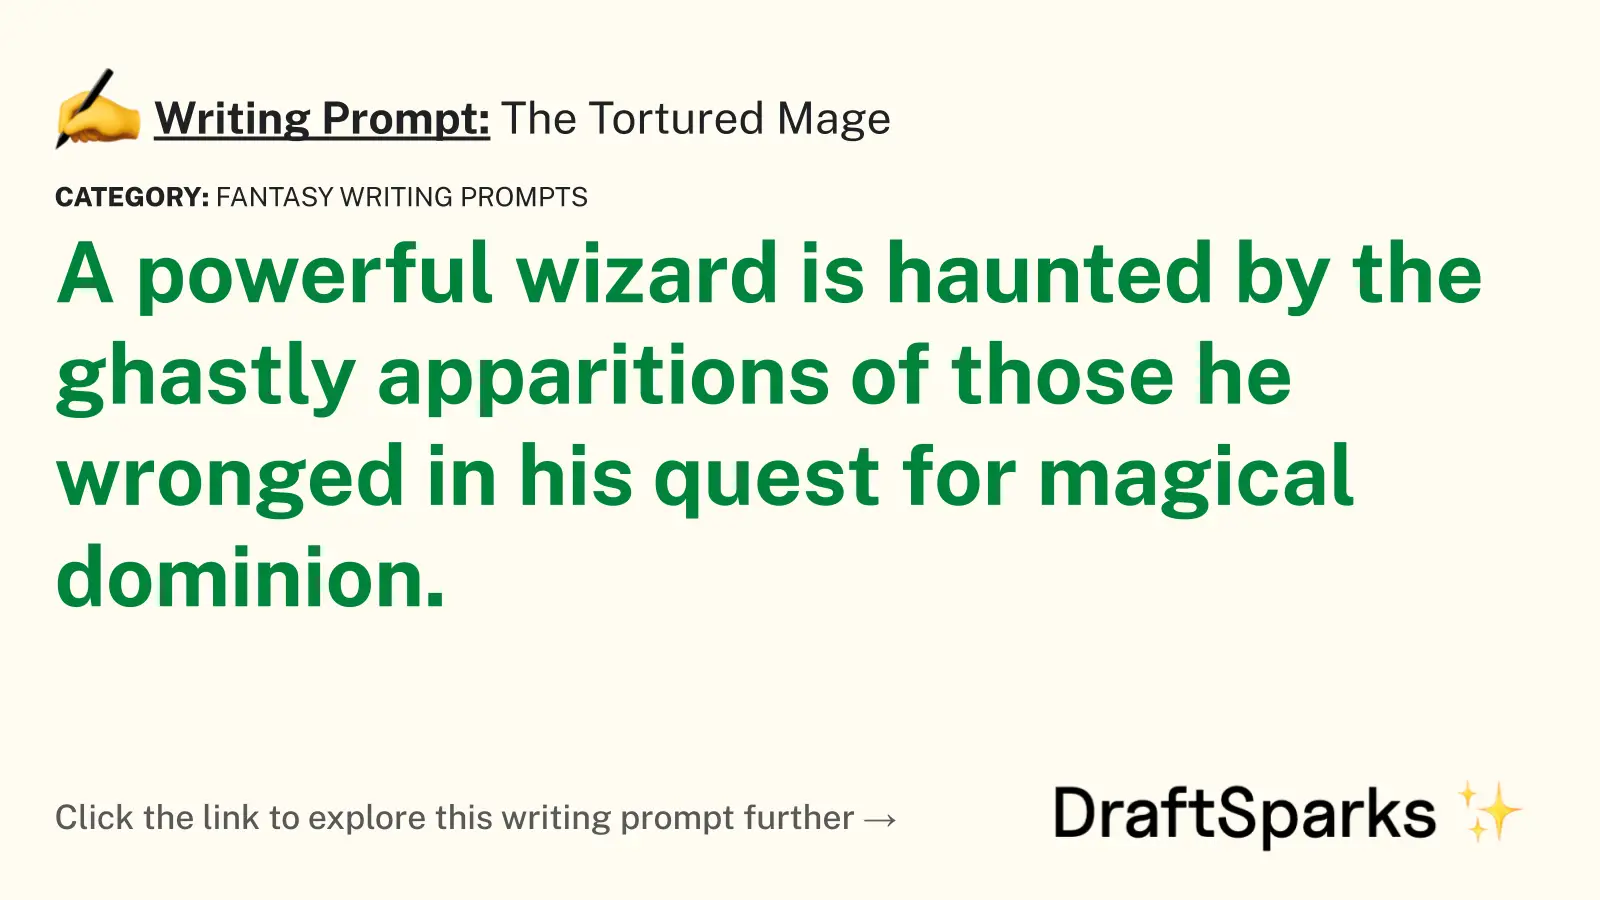 The Tortured Mage